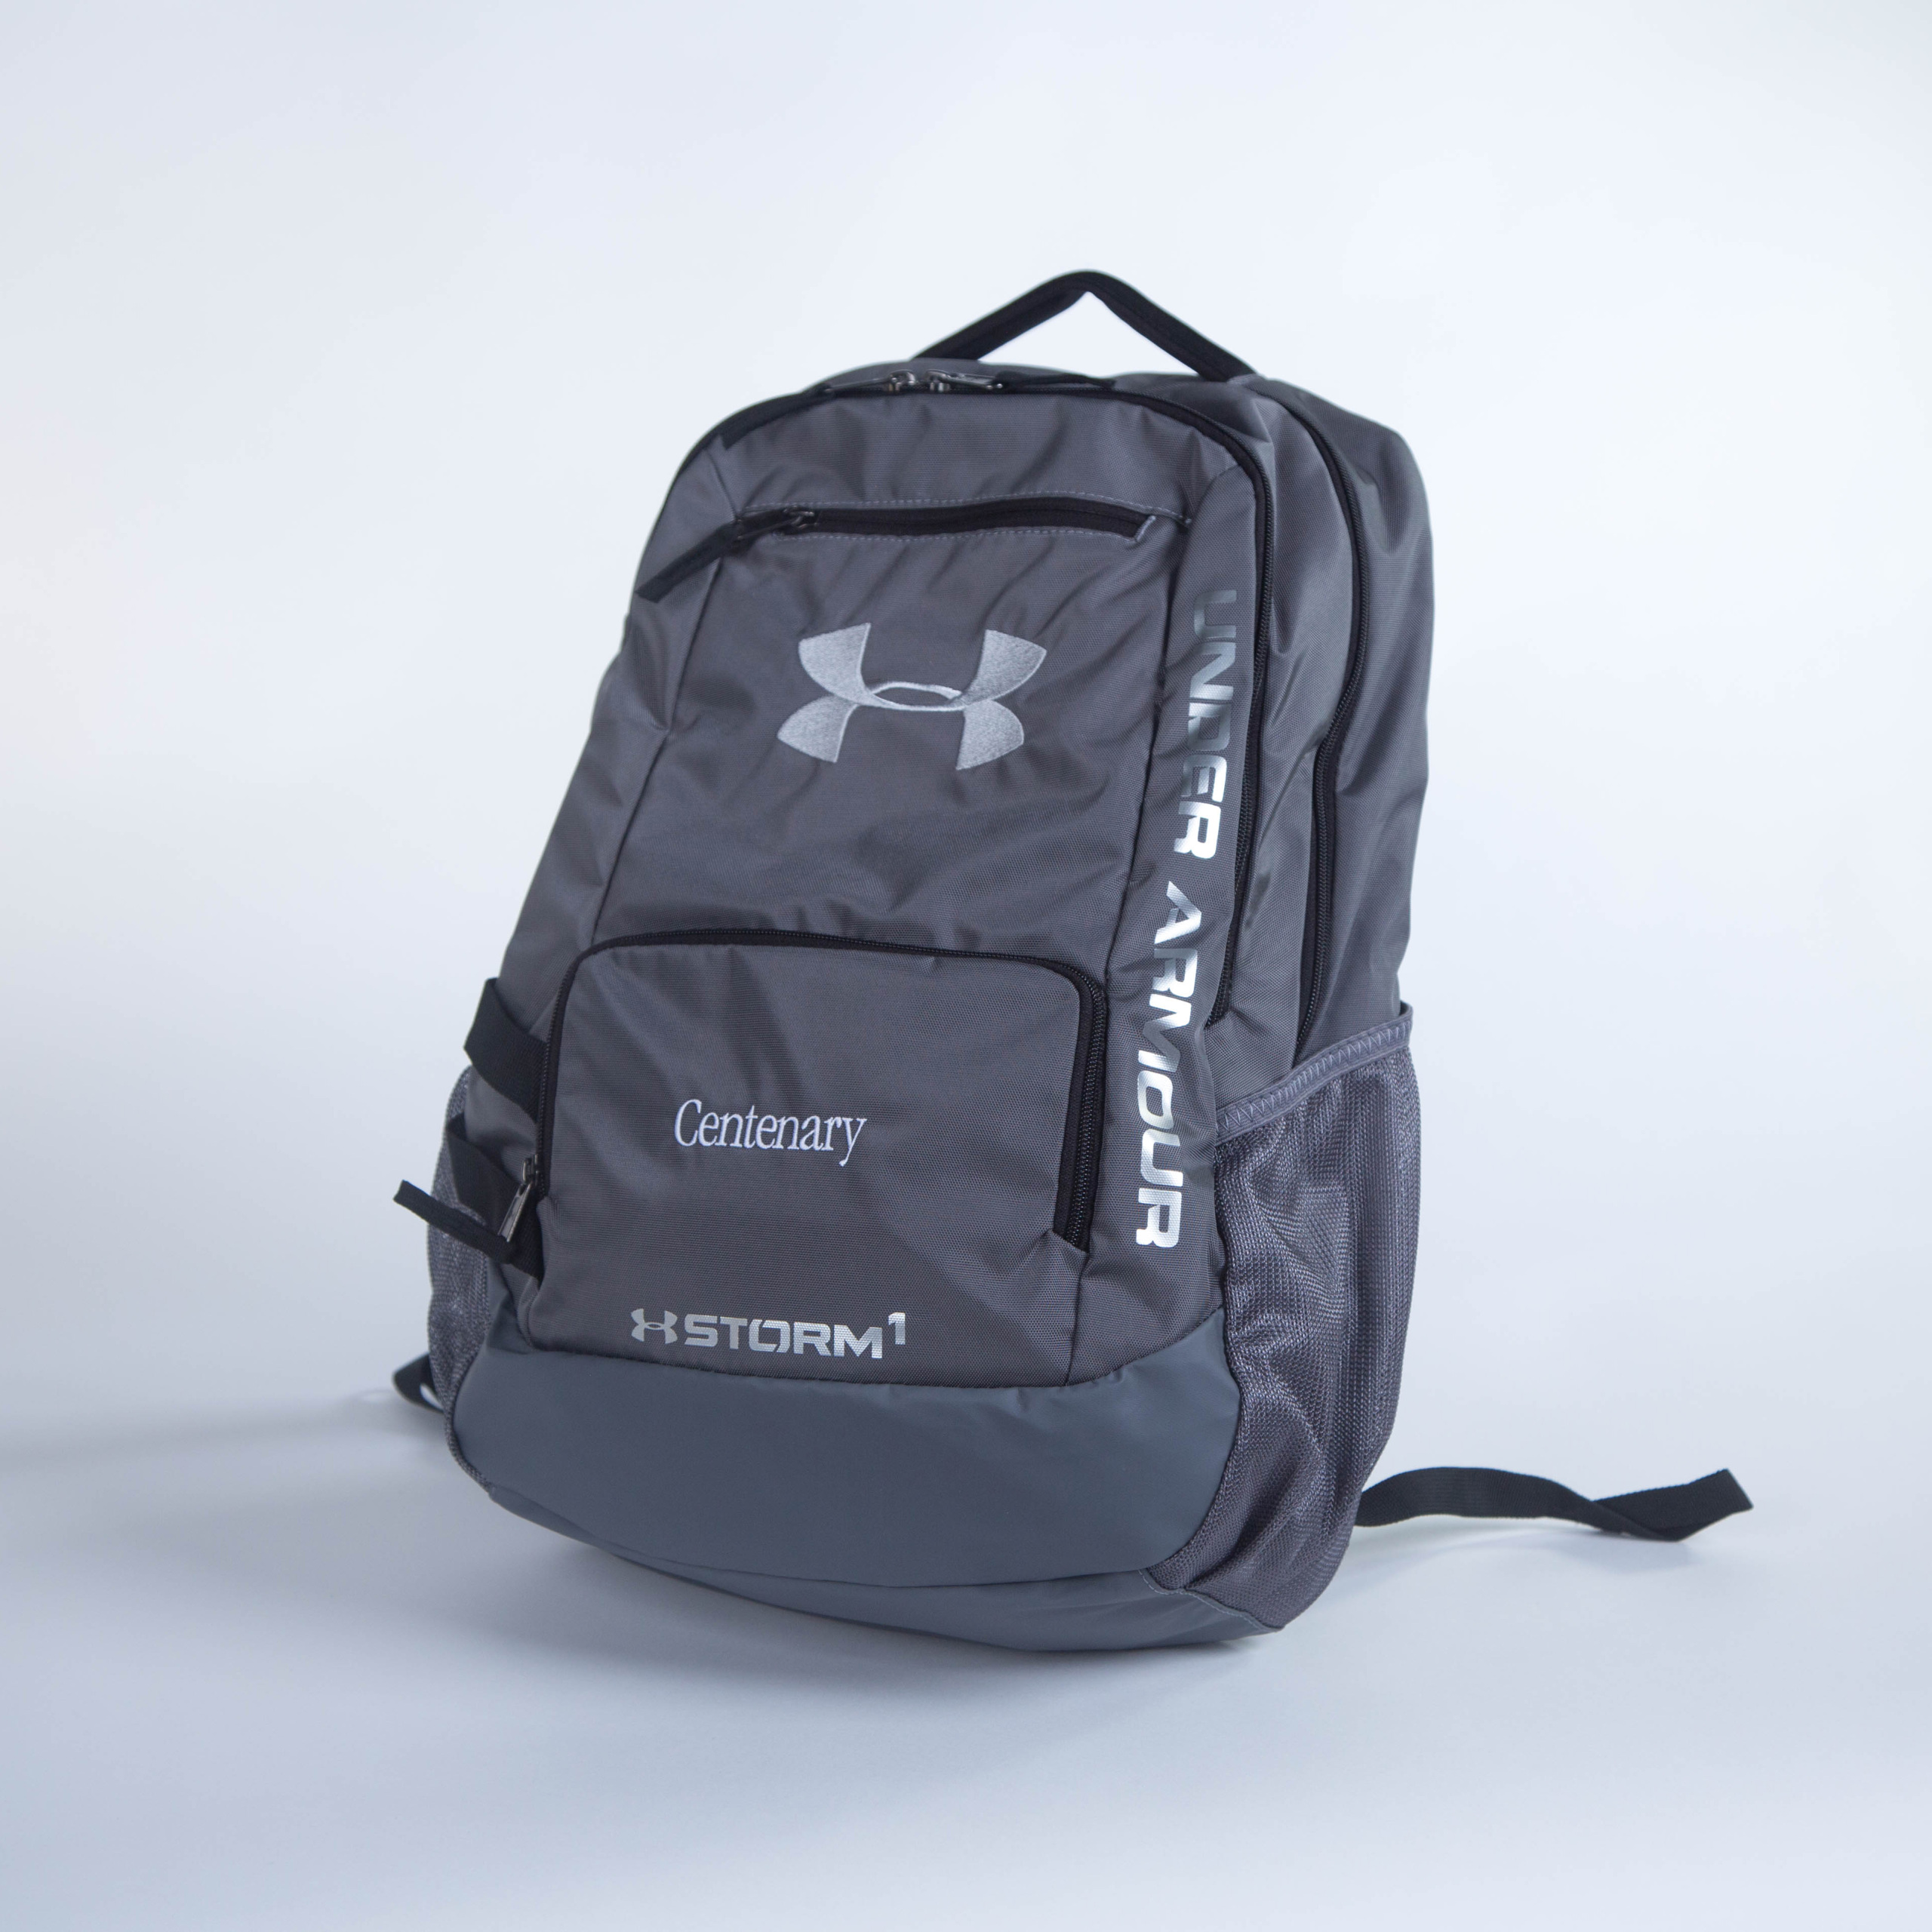 Under Armour - Storm 1 - Backpack 